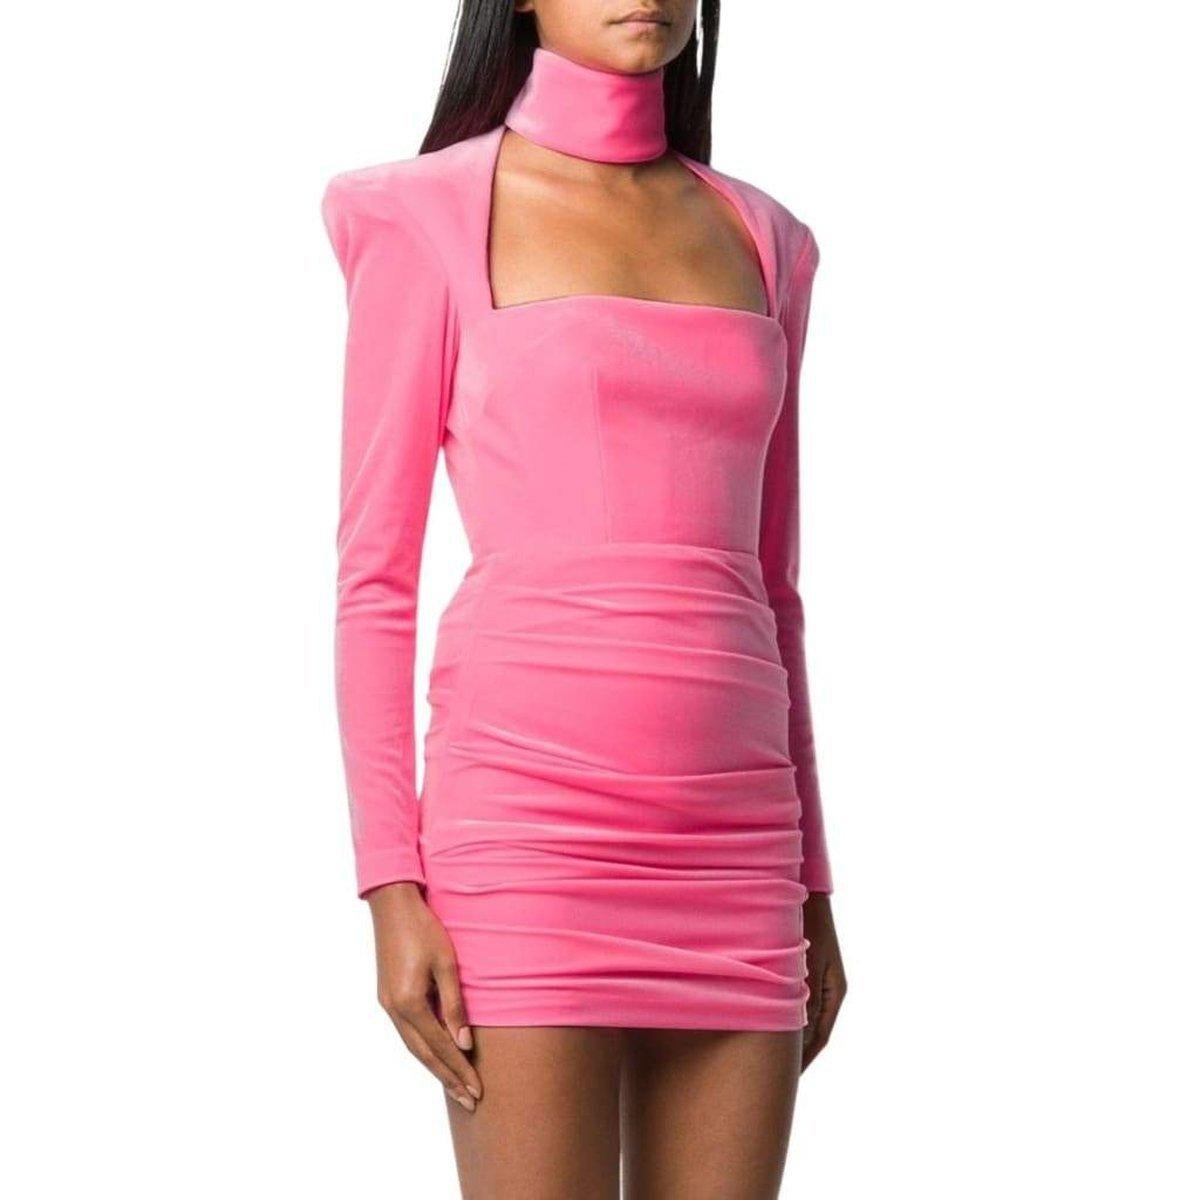 Alex Perry Ashton Ruched Mini Dress sz AU 12 US8 In New Condition For Sale In Brossard, QC